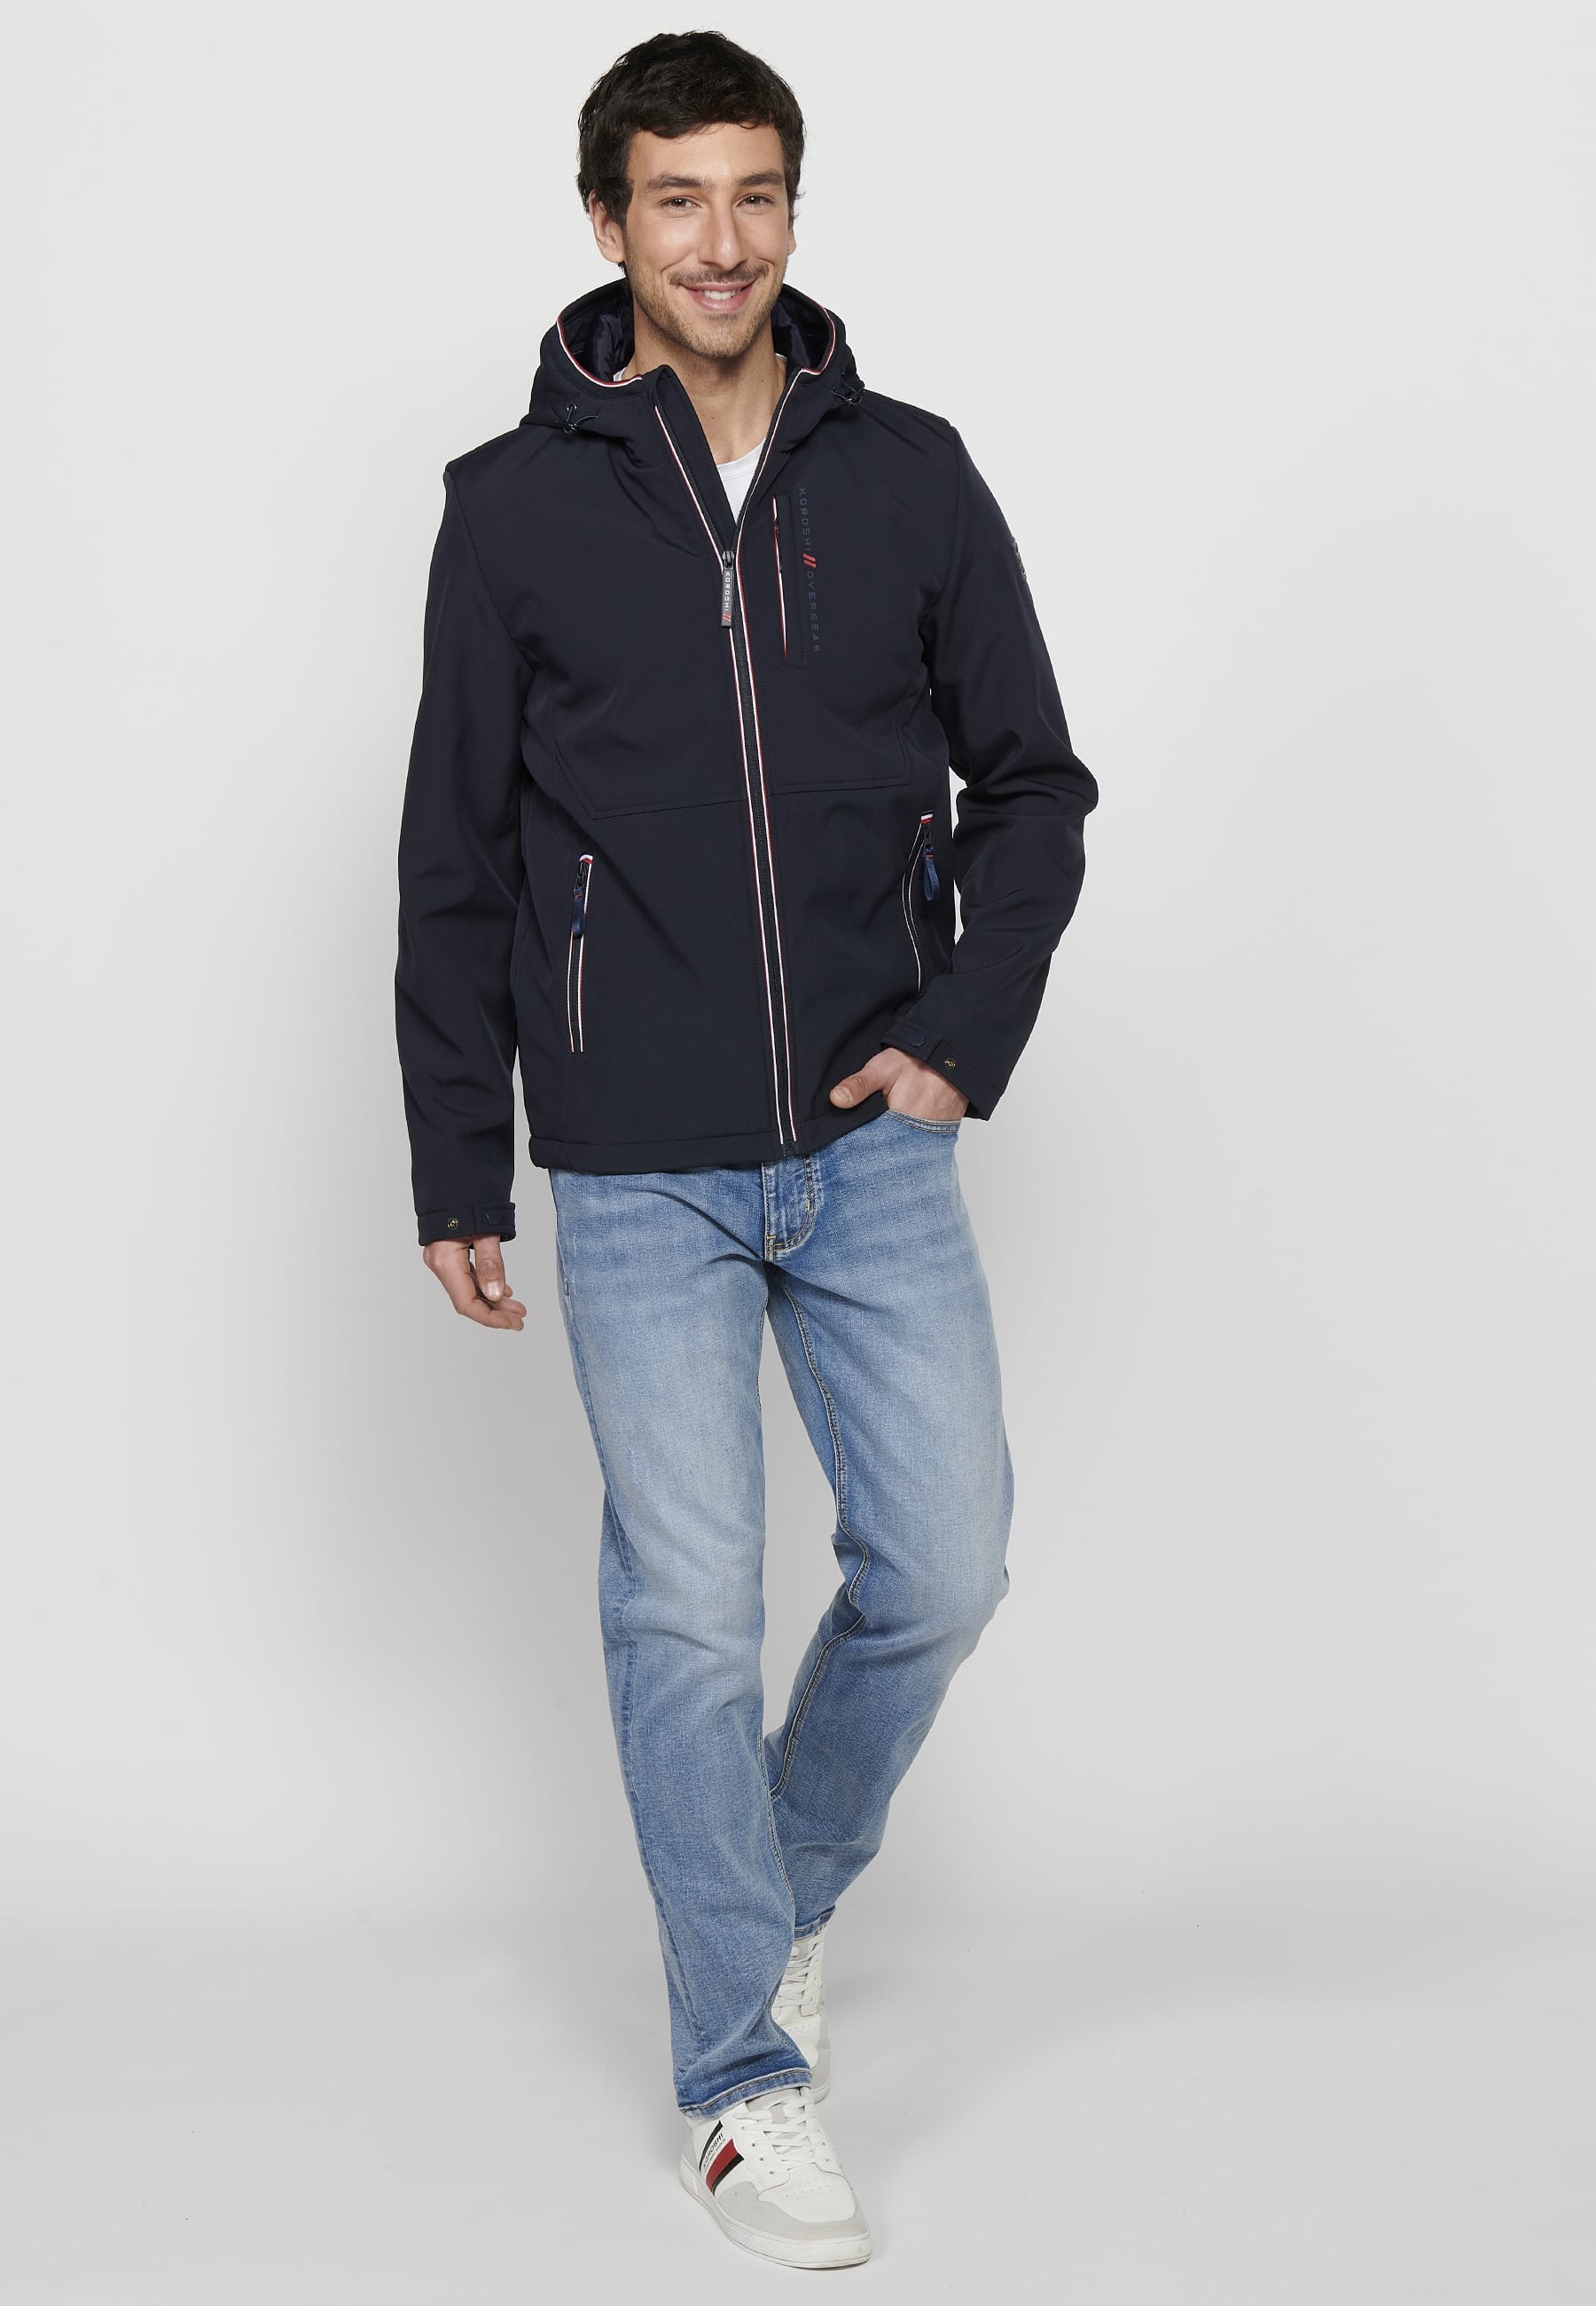 Navy Long Sleeve Jacket with Hooded Collar and Front Zipper Closure for Men 5